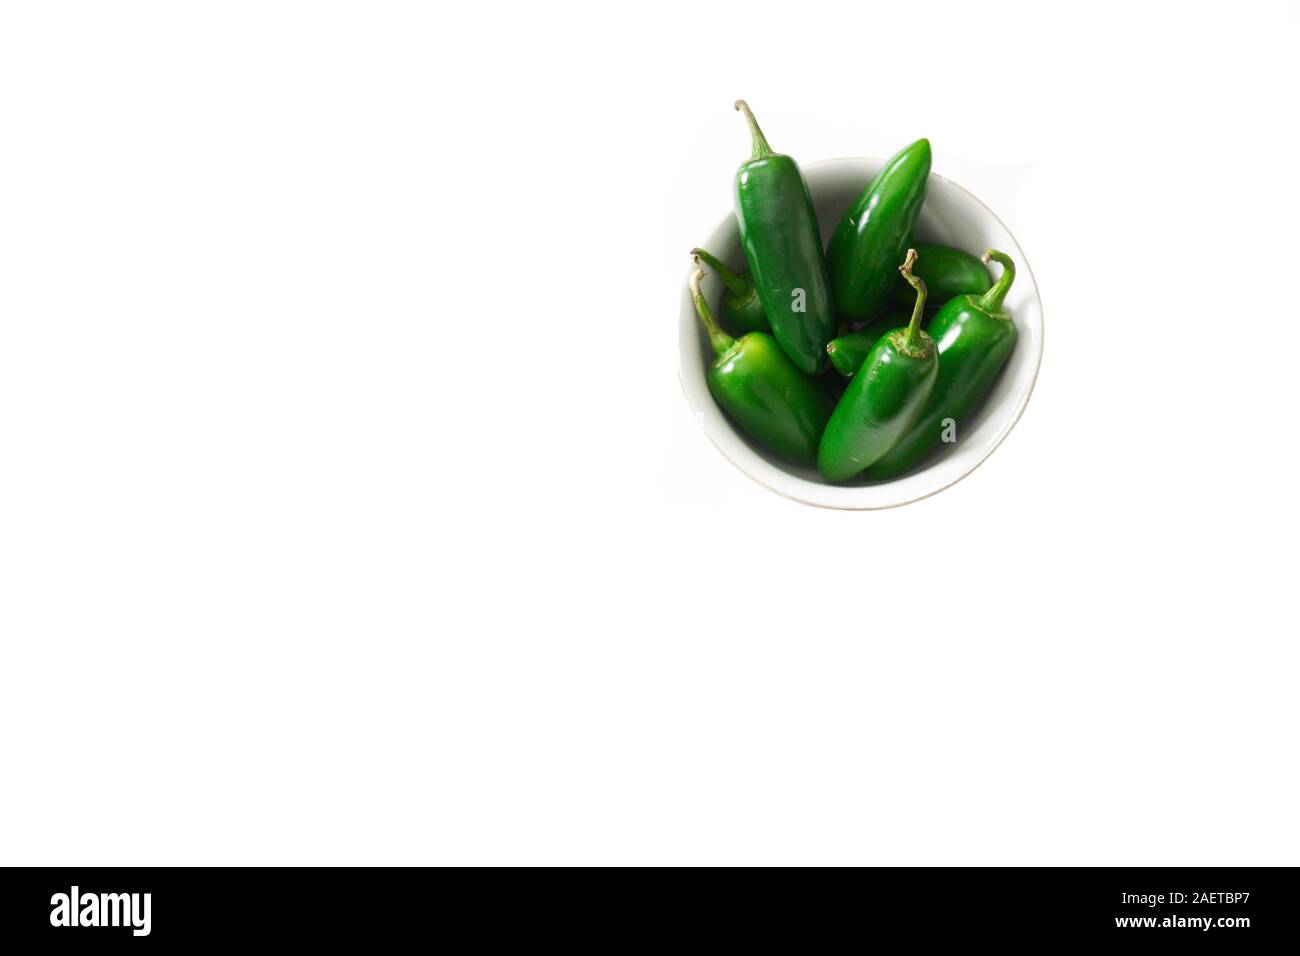 A bowl of bright green jalapeno peppers isolated on a white background with copy space; food preparation Stock Photo